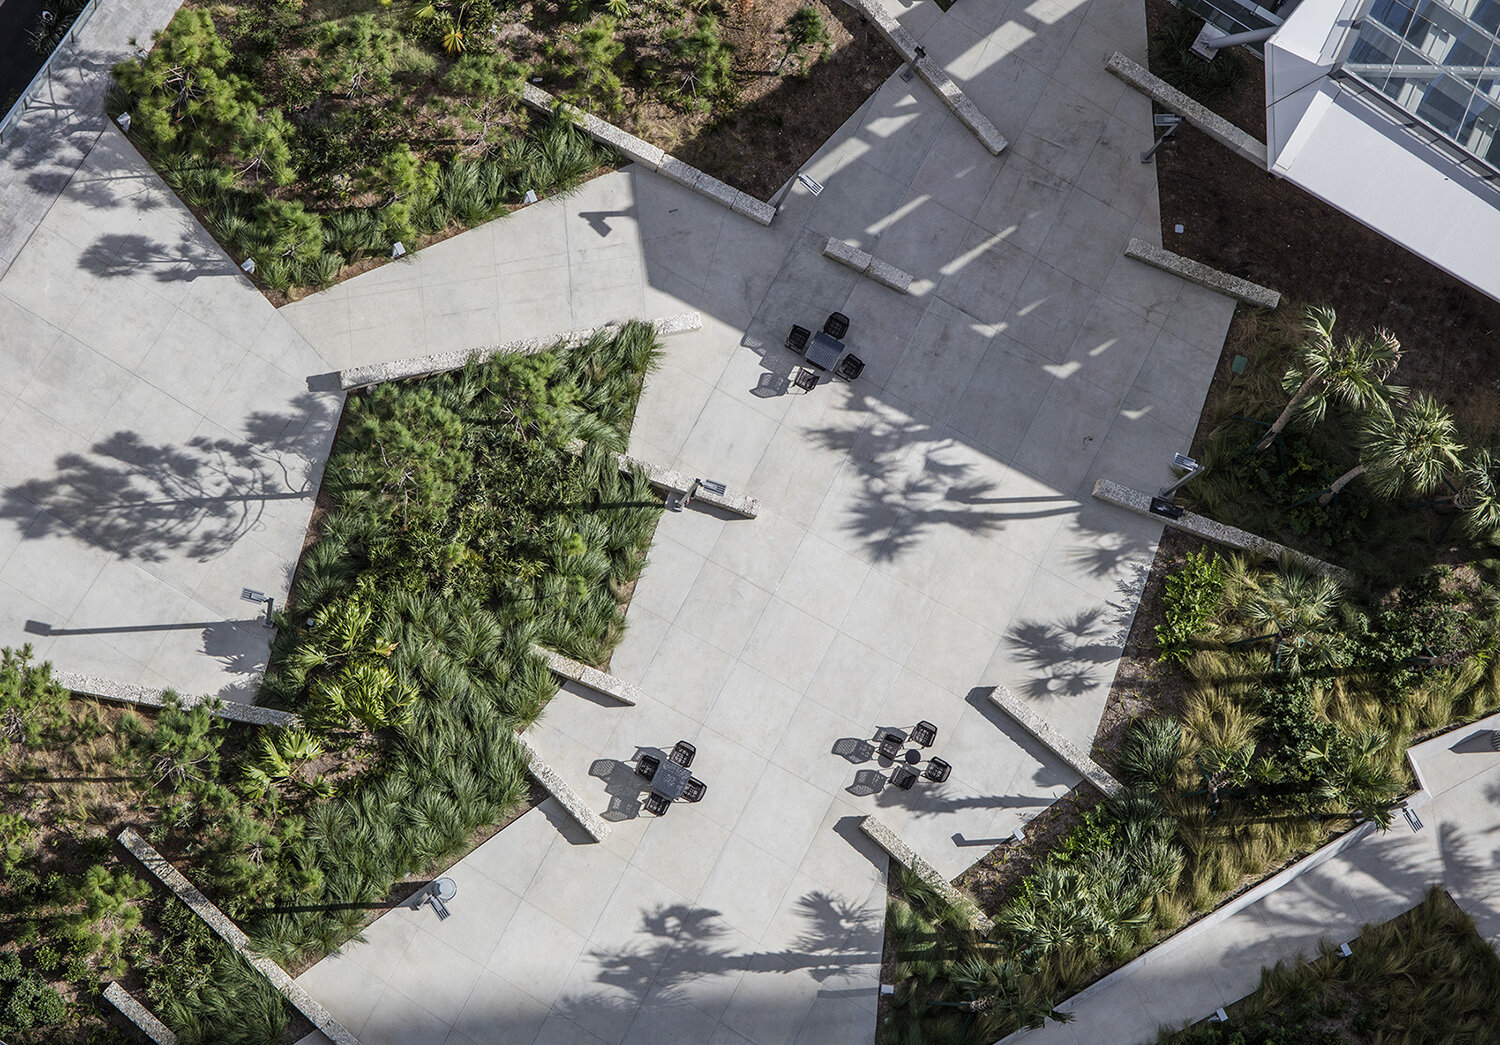 A top view of the landscape design of the central square